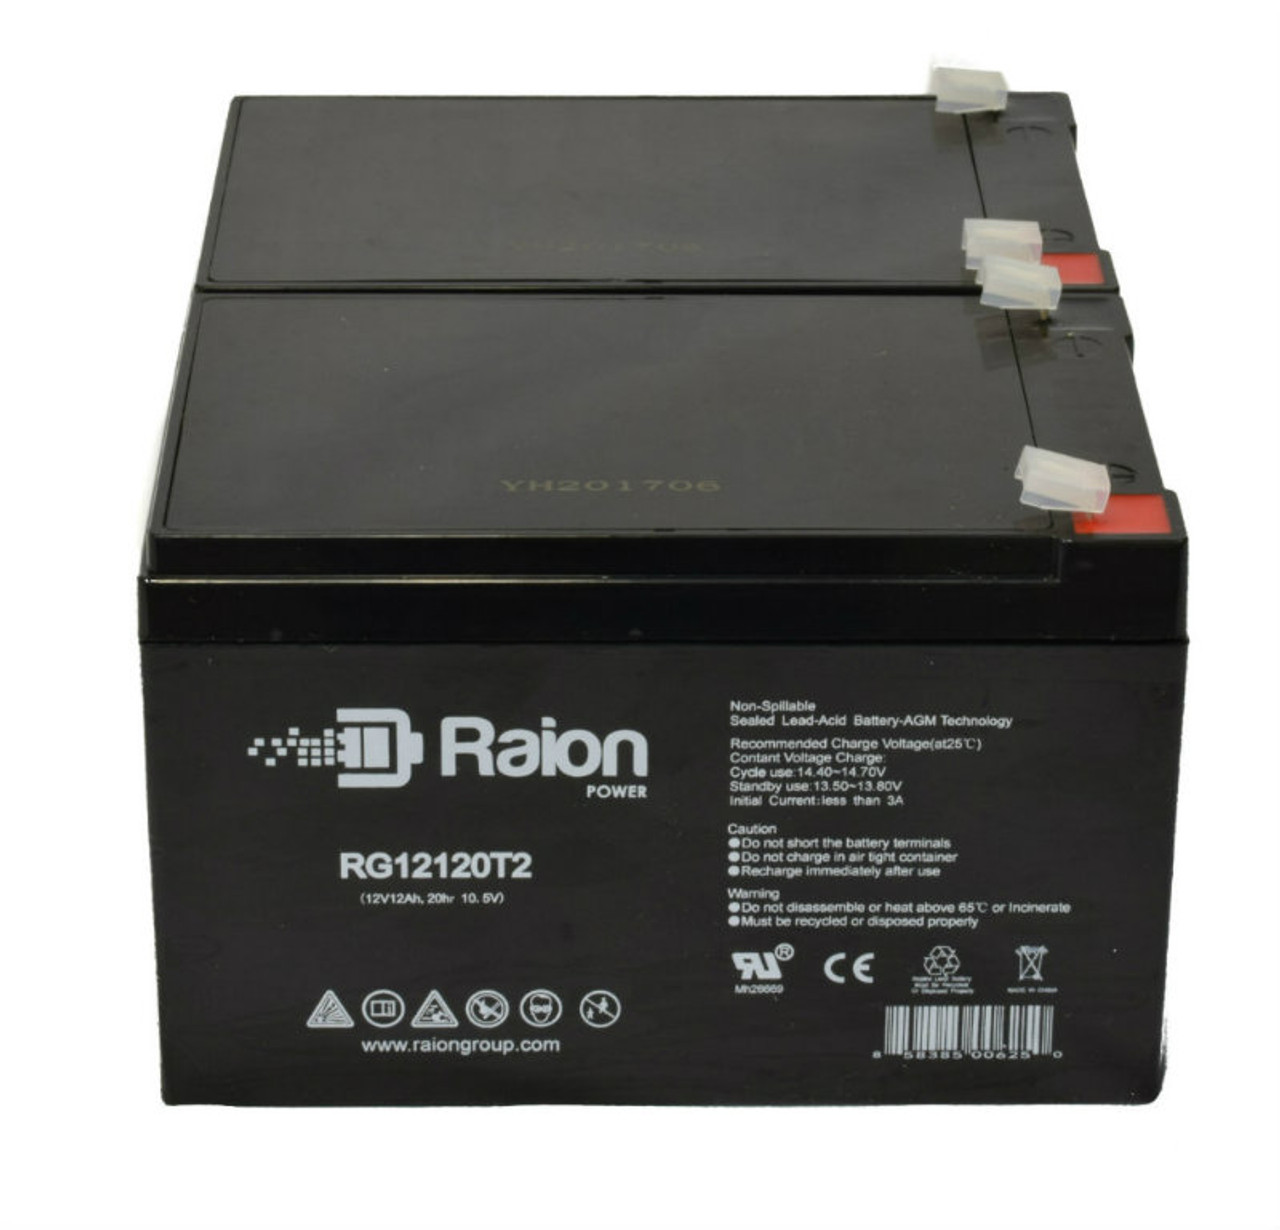 Raion Power 12V 12Ah Non-Spillable Compatible Replacement Battery for Ultratech UT-12120 - (2 Pack)